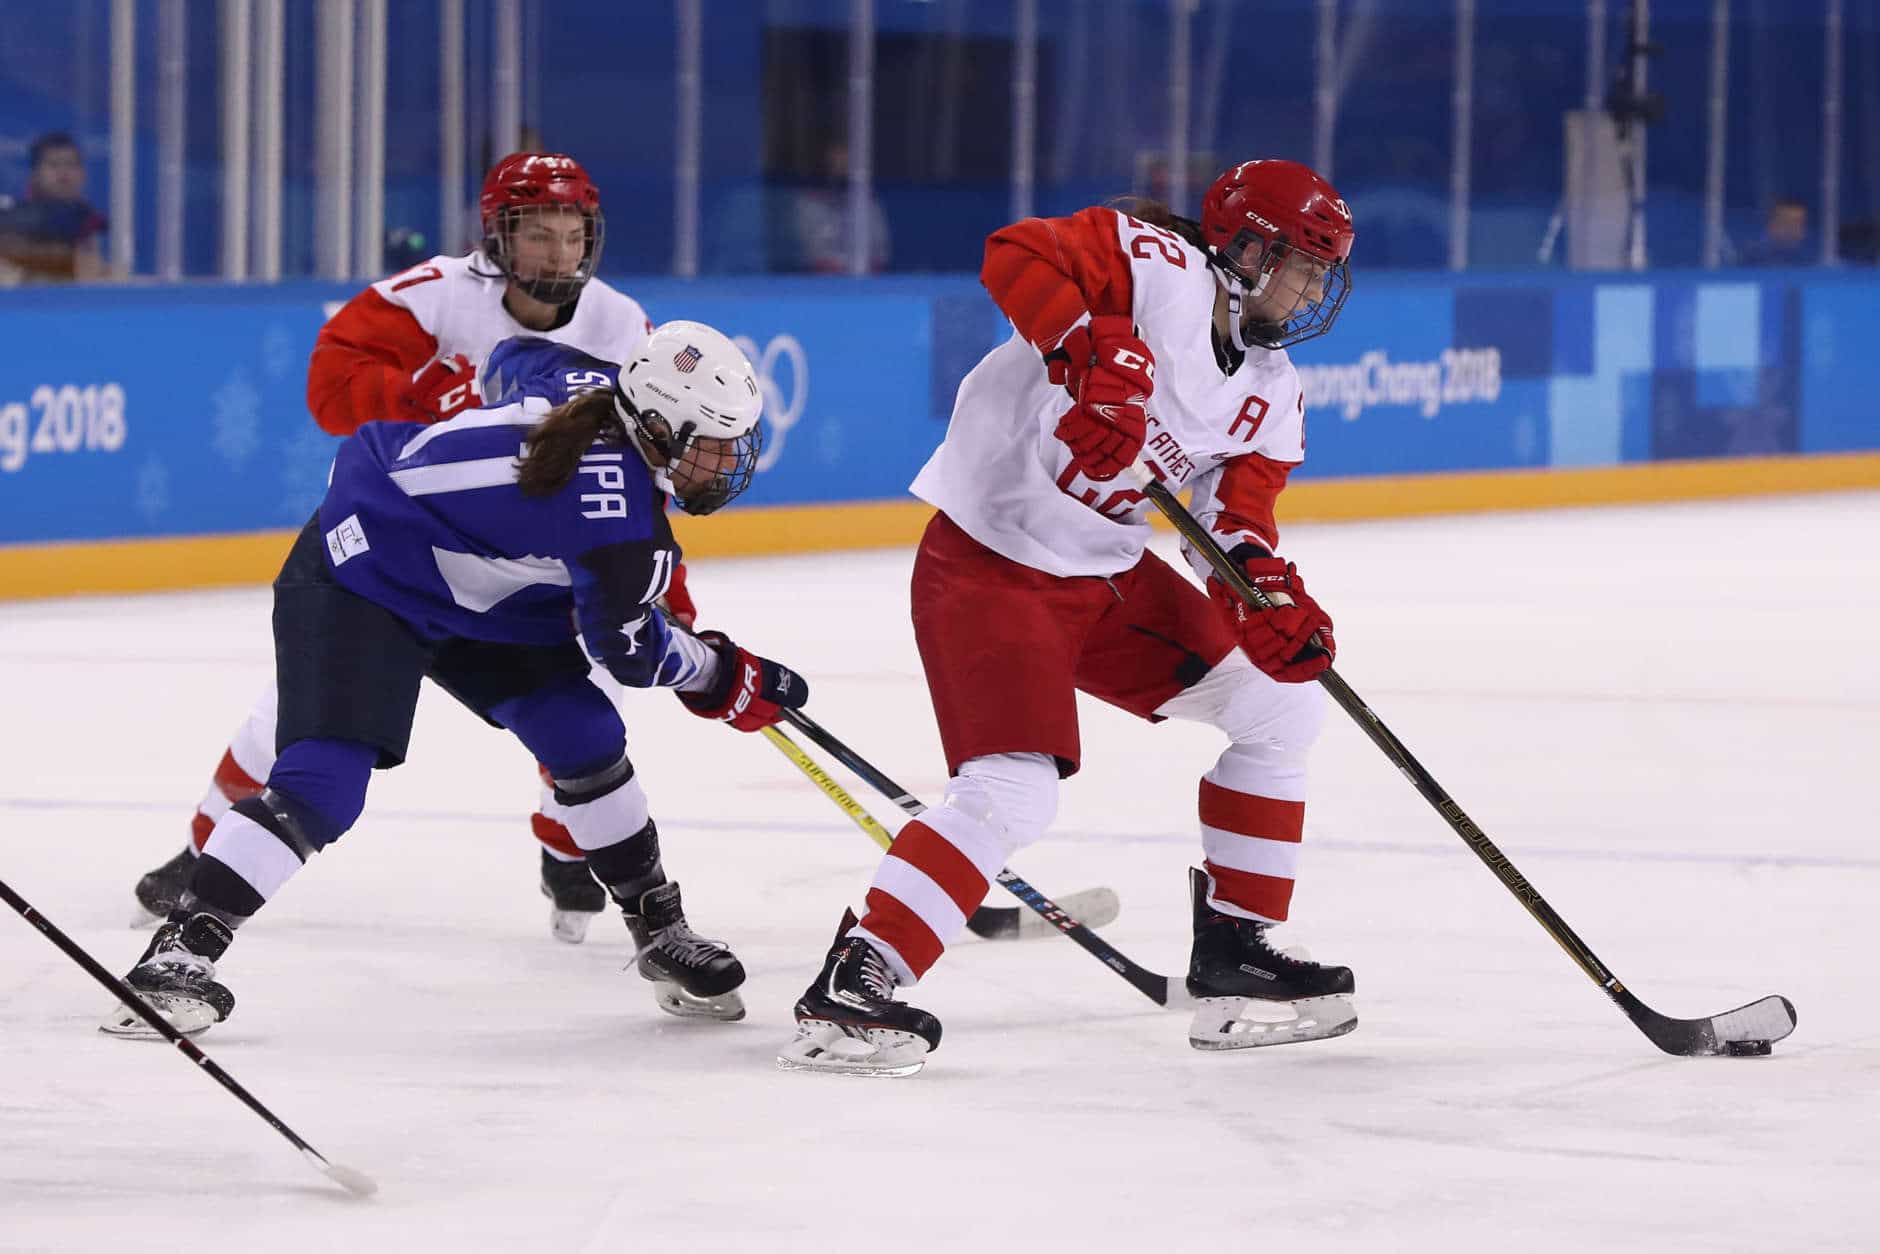 GANGNEUNG, SOUTH KOREA - FEBRUARY 13:  Maria Batalova #22 of Olympic Athlete from Russia battles for the puck with Haley Skarupa #11 of the United States in the first period during the Women's Ice Hockey Preliminary Round - Group A game on day four of the PyeongChang 2018 Winter Olympic Games at Kwandong Hockey Centre on February 13, 2018 in Gangneung, South Korea.  (Photo by Ronald Martinez/Getty Images)